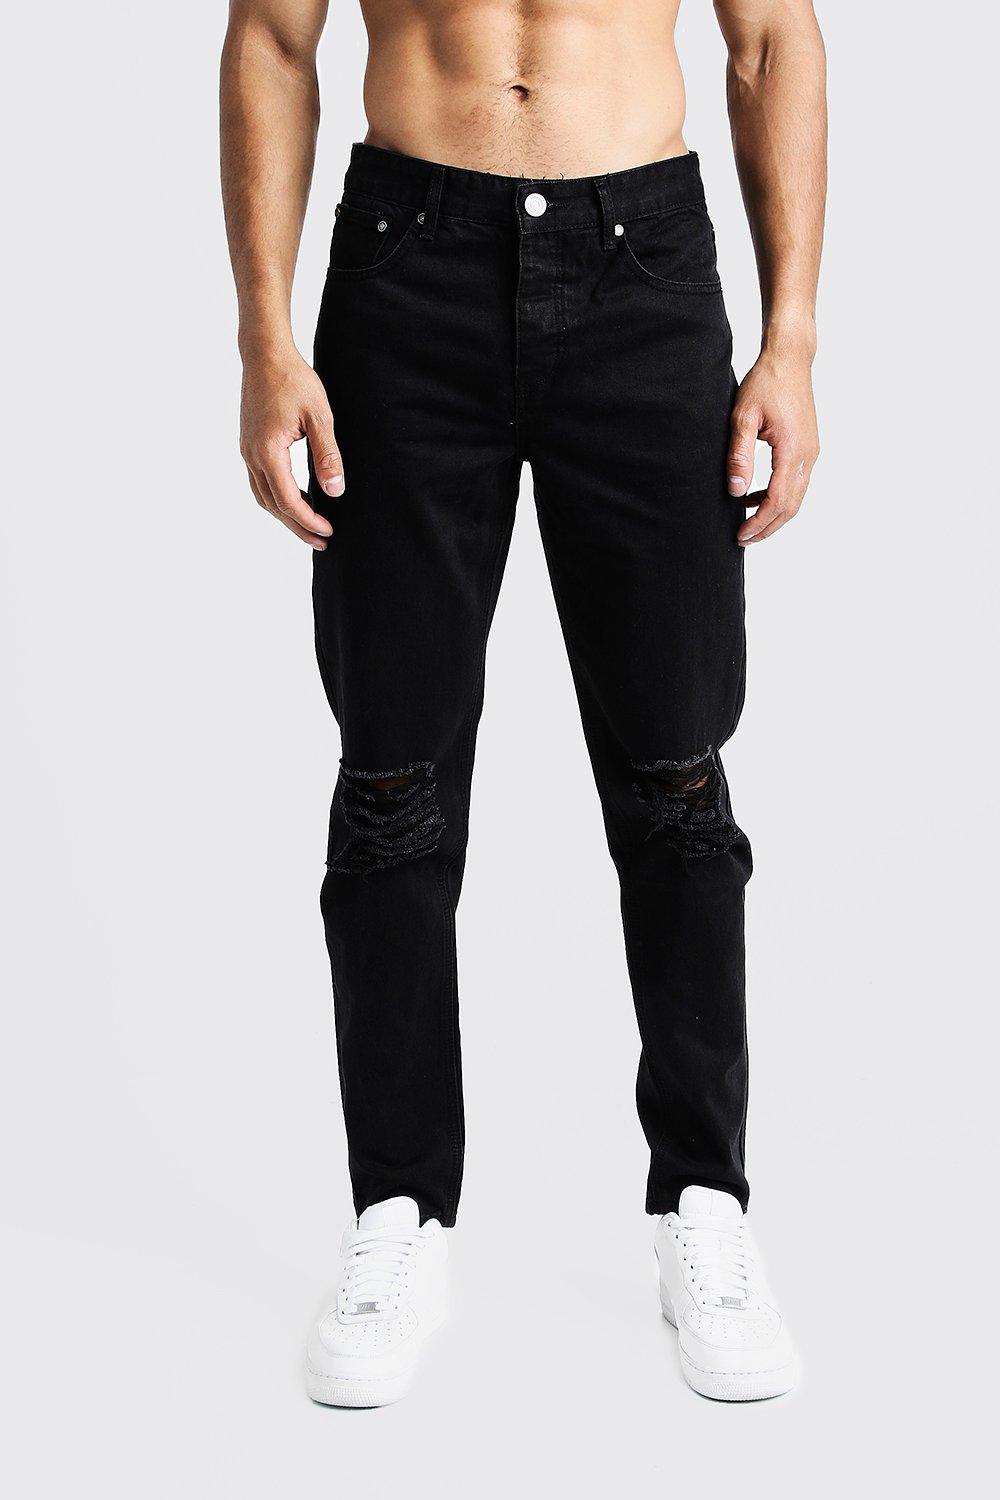 black ripped tapered jeans mens